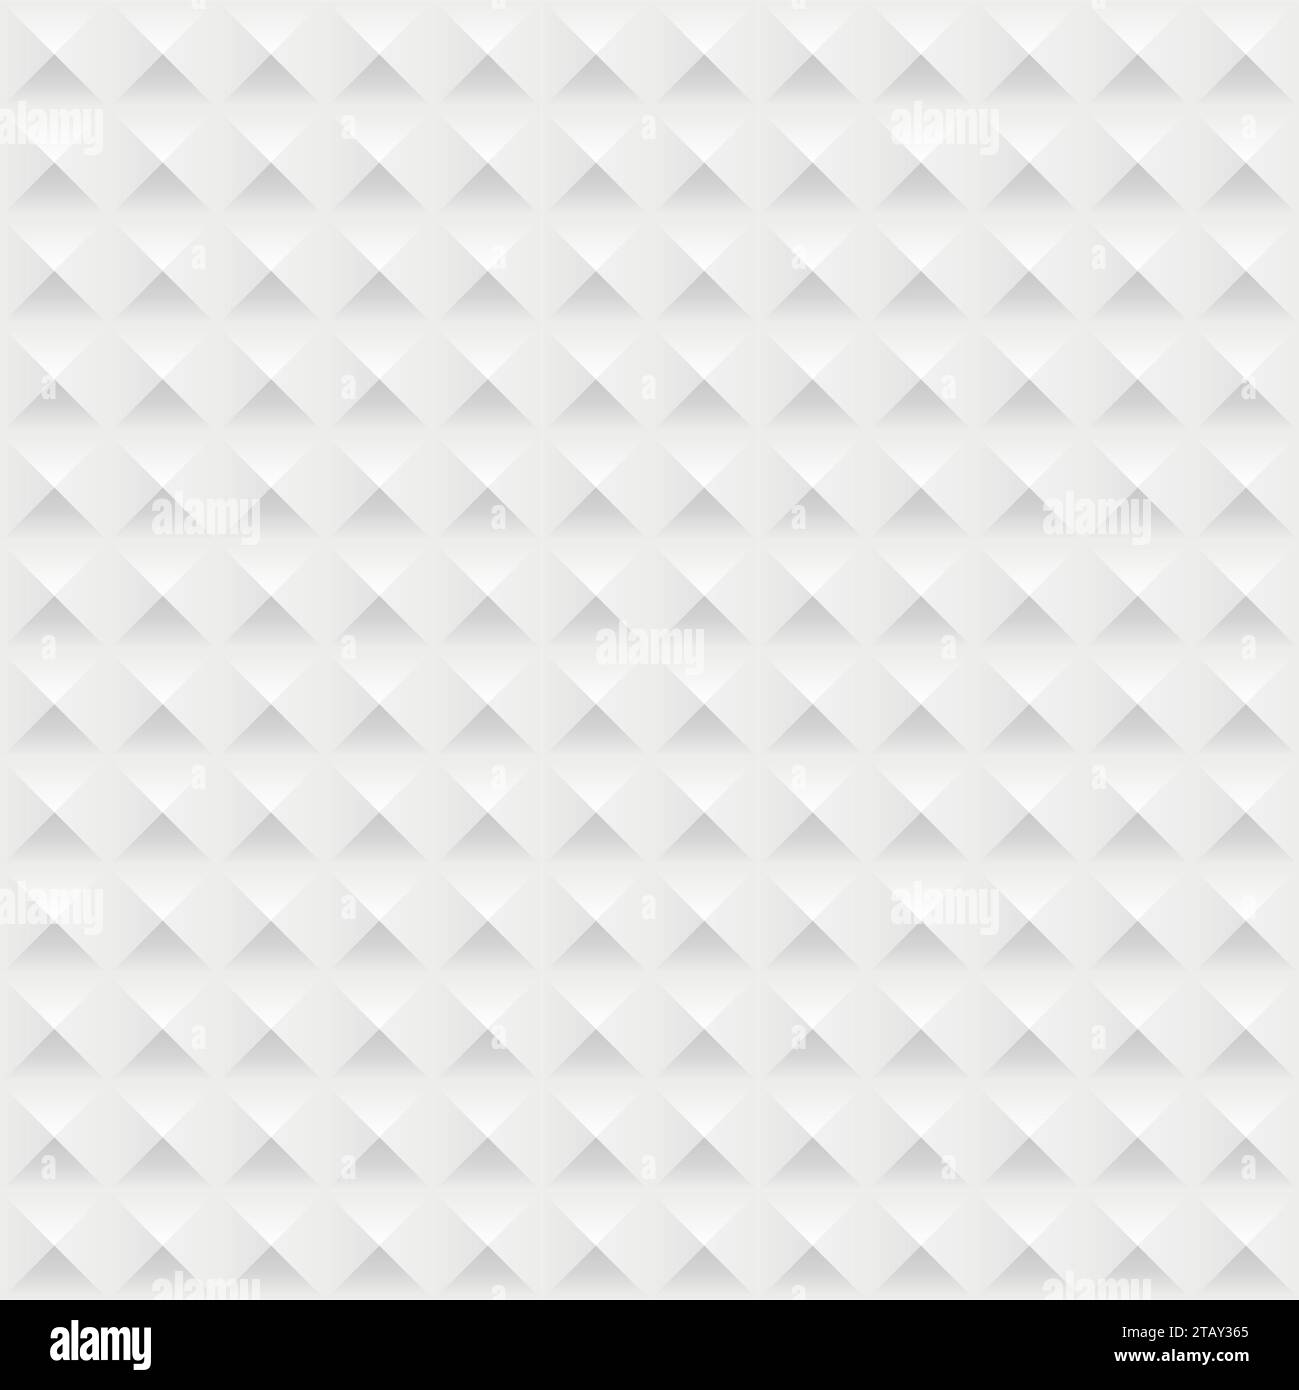 Geometric Seamless Texture Small Blurred Triangles Stock Vector